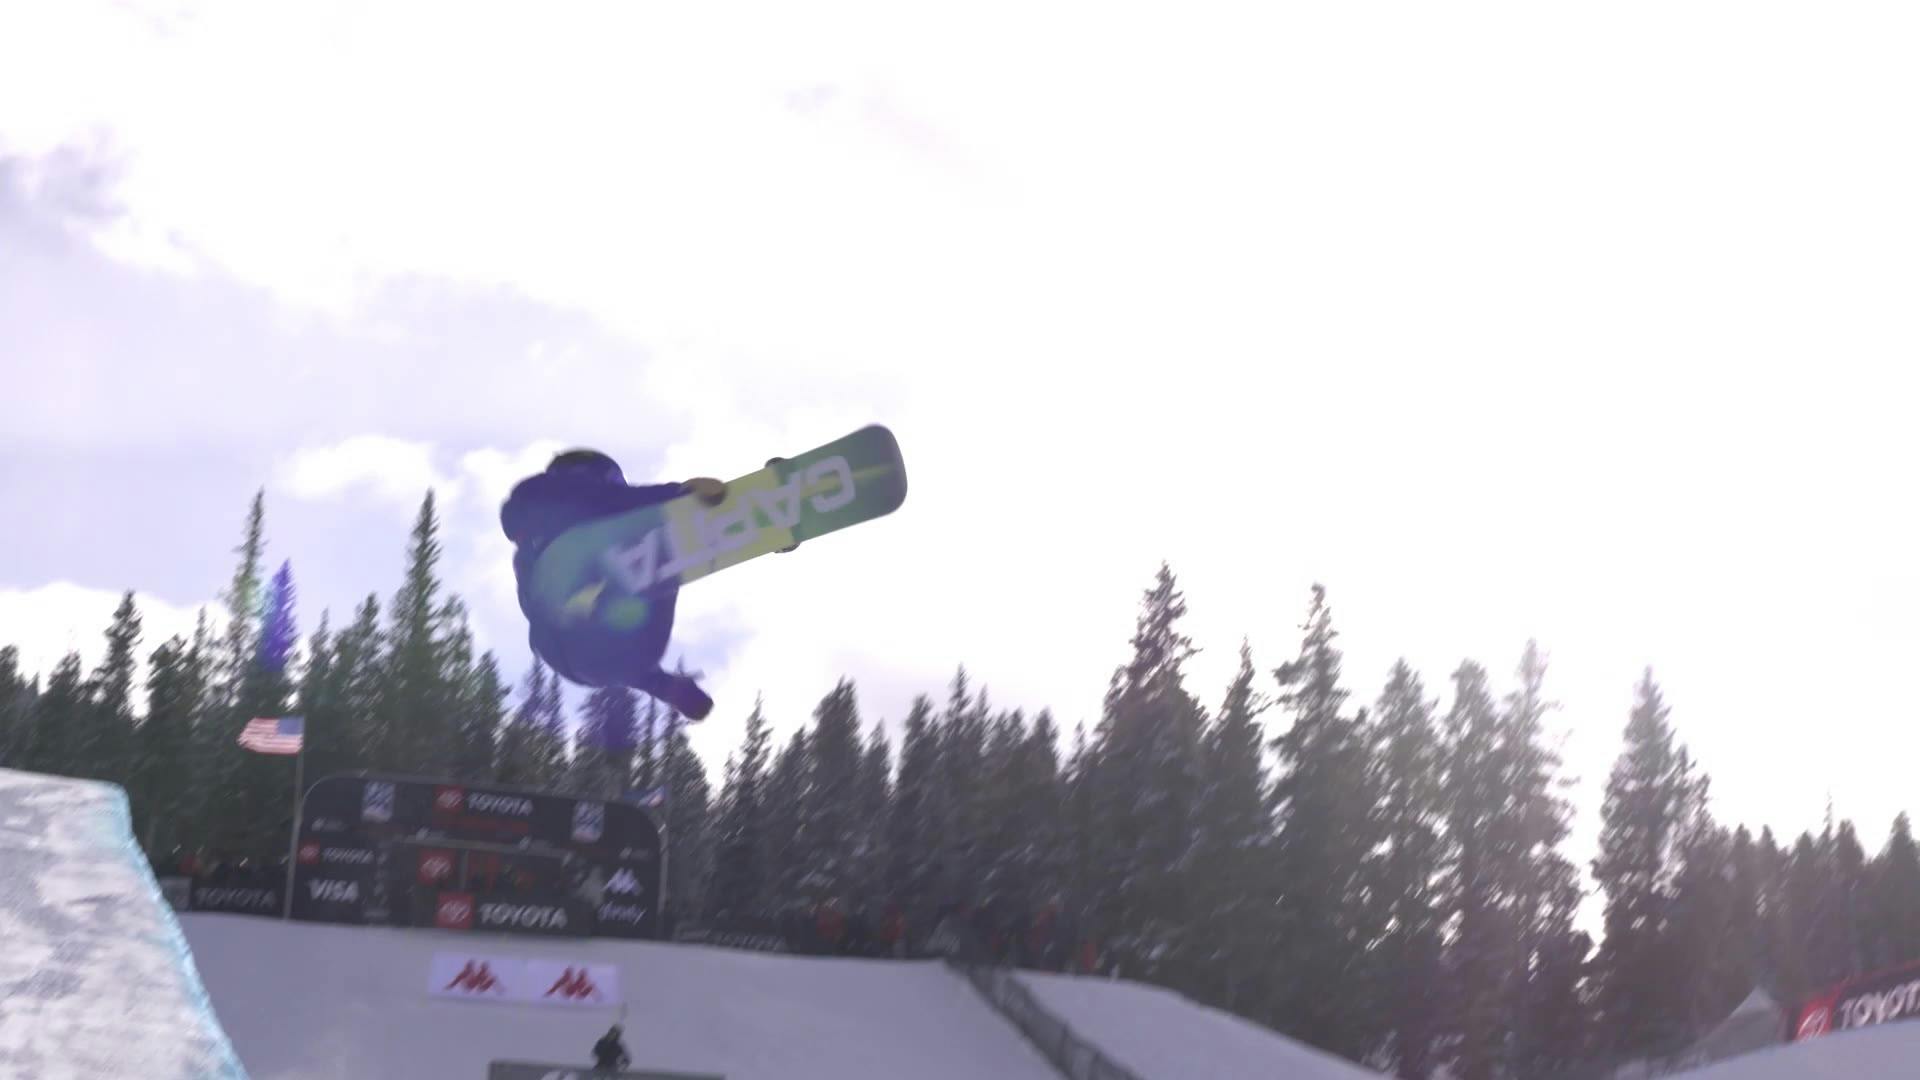 Toyota U.S. Grand Prix Copper Mountain: Men's & Women's US Snowboard World Cup Halfpipe Highlights | USSS Event Replays